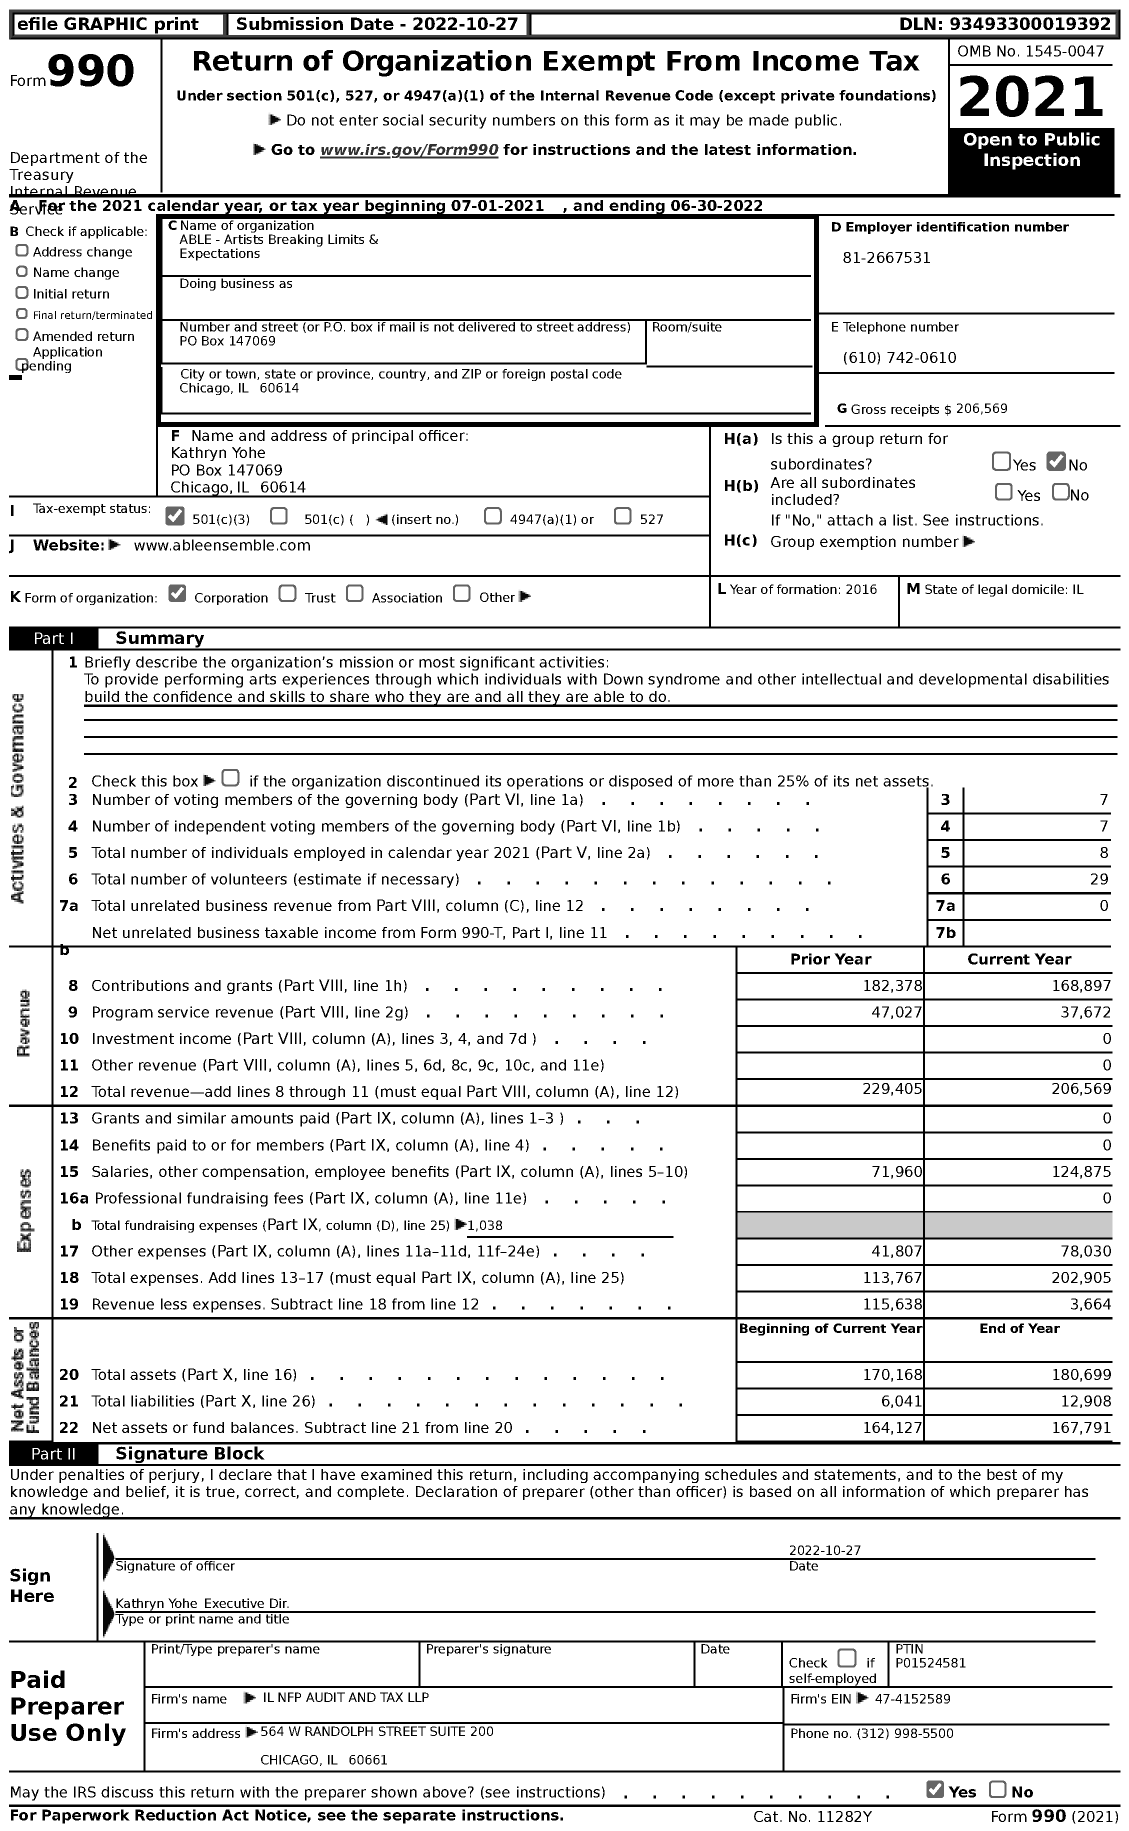 Image of first page of 2021 Form 990 for ABLE - Artists Breaking Limits & Expectations